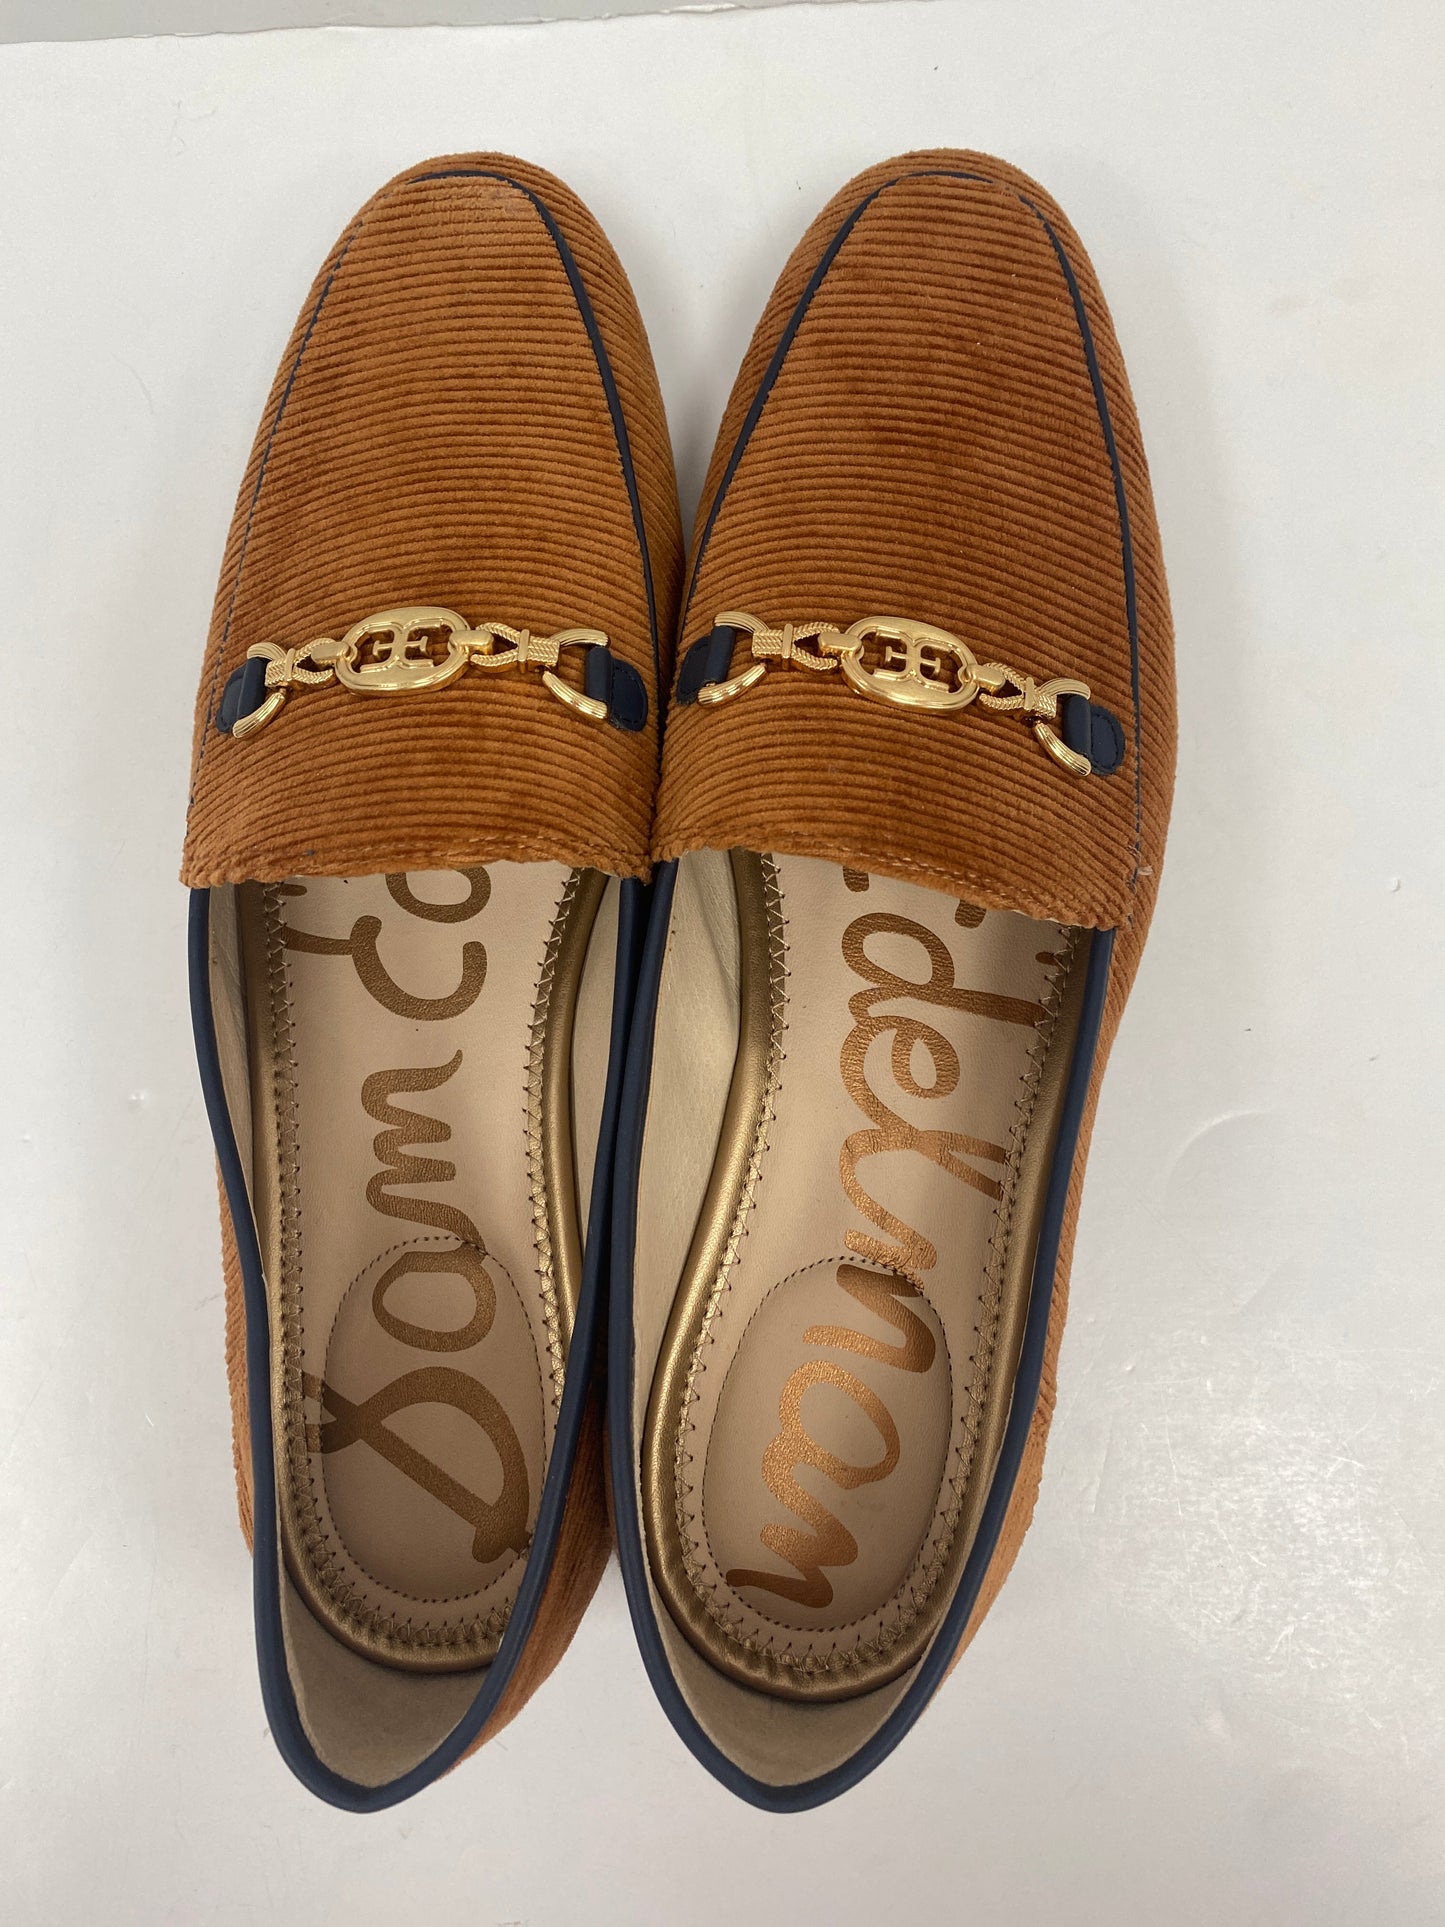 Shoes Flats Loafer Oxford By Sam Edelman  Size: 9.5